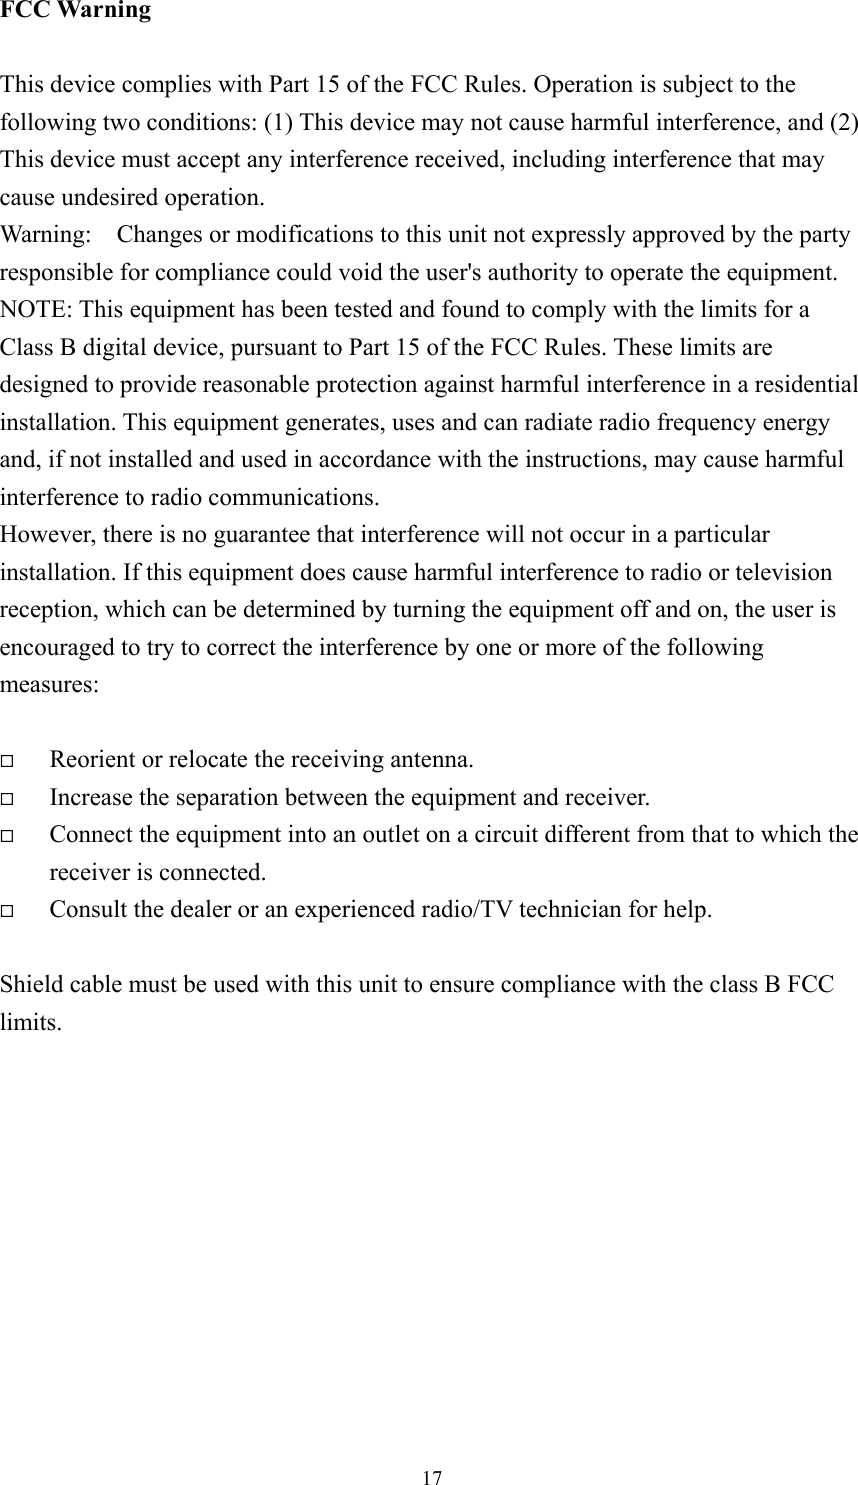  17FCC Warning  This device complies with Part 15 of the FCC Rules. Operation is subject to the following two conditions: (1) This device may not cause harmful interference, and (2) This device must accept any interference received, including interference that may cause undesired operation. Warning:    Changes or modifications to this unit not expressly approved by the party responsible for compliance could void the user&apos;s authority to operate the equipment. NOTE: This equipment has been tested and found to comply with the limits for a Class B digital device, pursuant to Part 15 of the FCC Rules. These limits are designed to provide reasonable protection against harmful interference in a residential installation. This equipment generates, uses and can radiate radio frequency energy and, if not installed and used in accordance with the instructions, may cause harmful interference to radio communications. However, there is no guarantee that interference will not occur in a particular installation. If this equipment does cause harmful interference to radio or television reception, which can be determined by turning the equipment off and on, the user is encouraged to try to correct the interference by one or more of the following measures:    Reorient or relocate the receiving antenna.   Increase the separation between the equipment and receiver.   Connect the equipment into an outlet on a circuit different from that to which the receiver is connected.   Consult the dealer or an experienced radio/TV technician for help.  Shield cable must be used with this unit to ensure compliance with the class B FCC limits.           